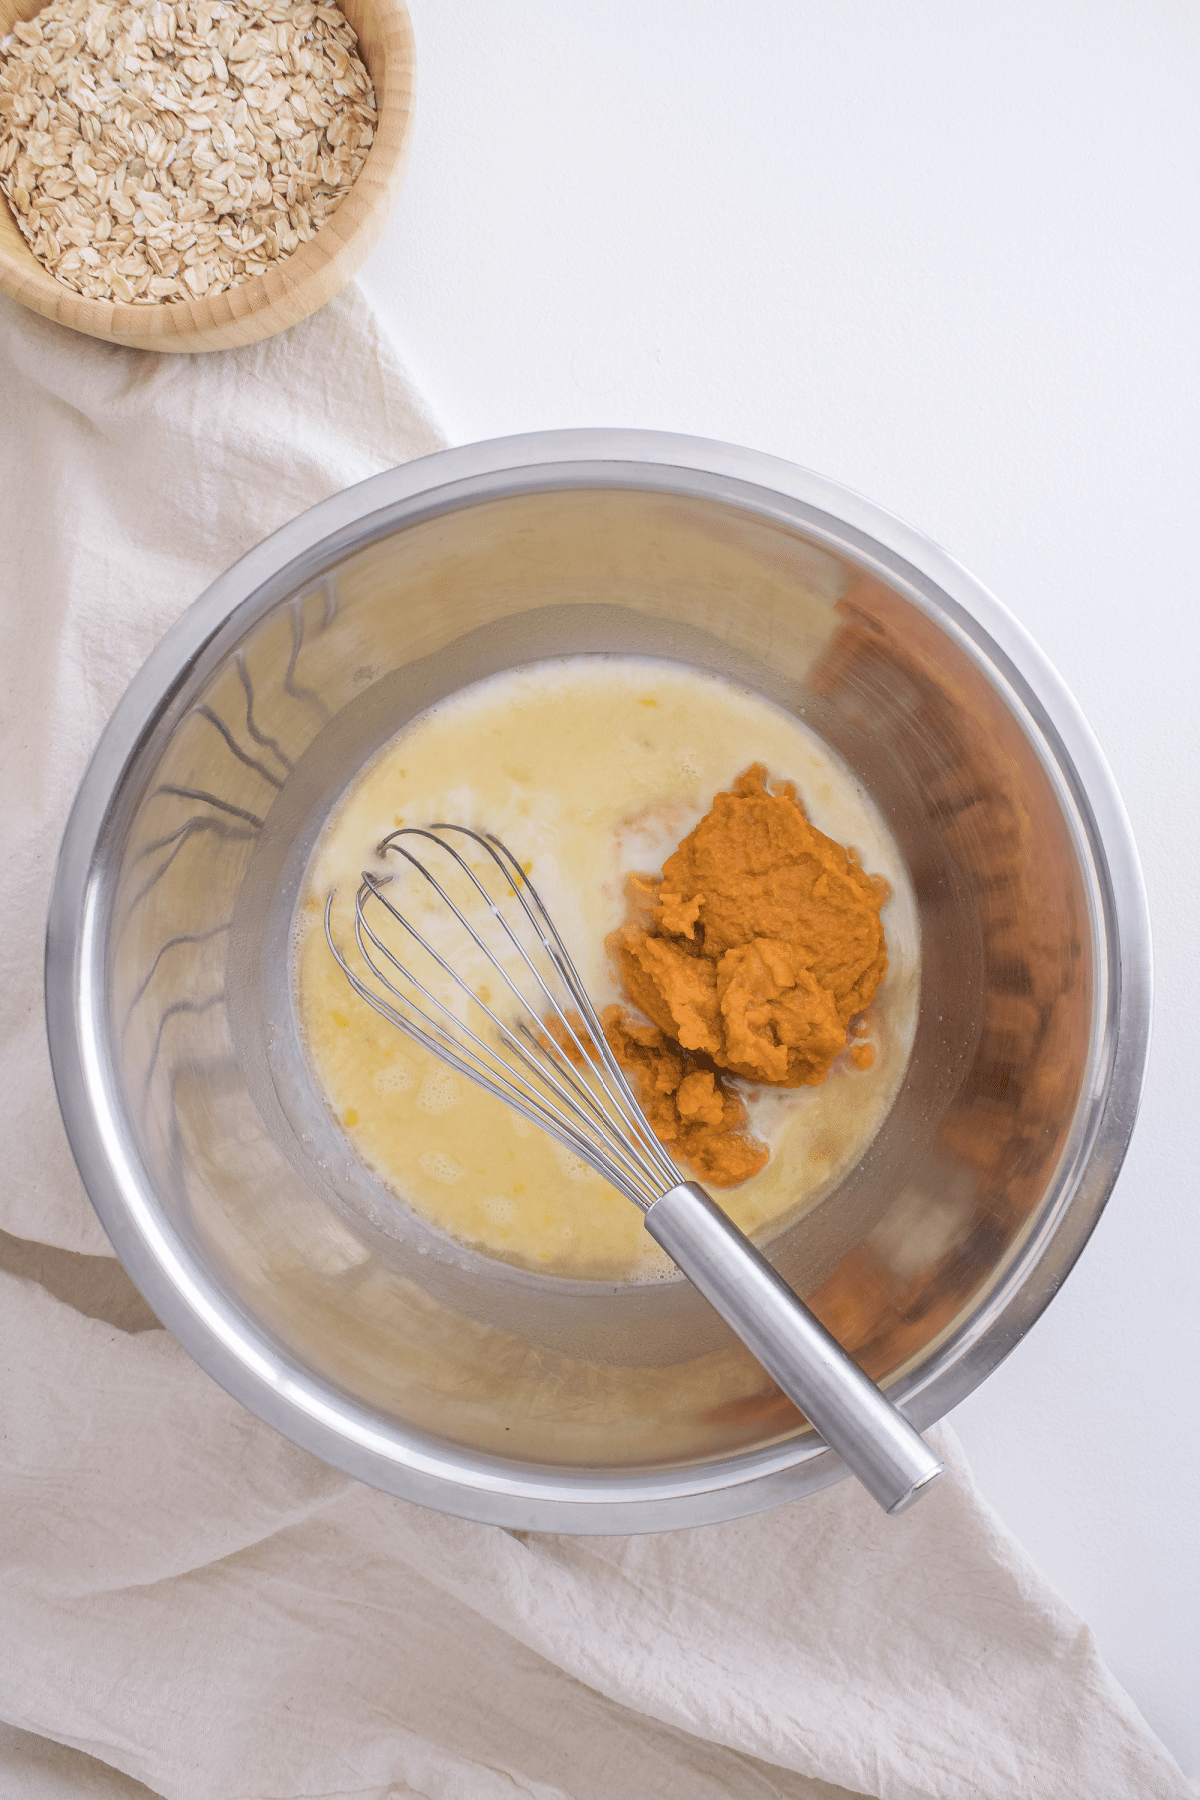 Pumpkin puree and other wet ingredients for muffins